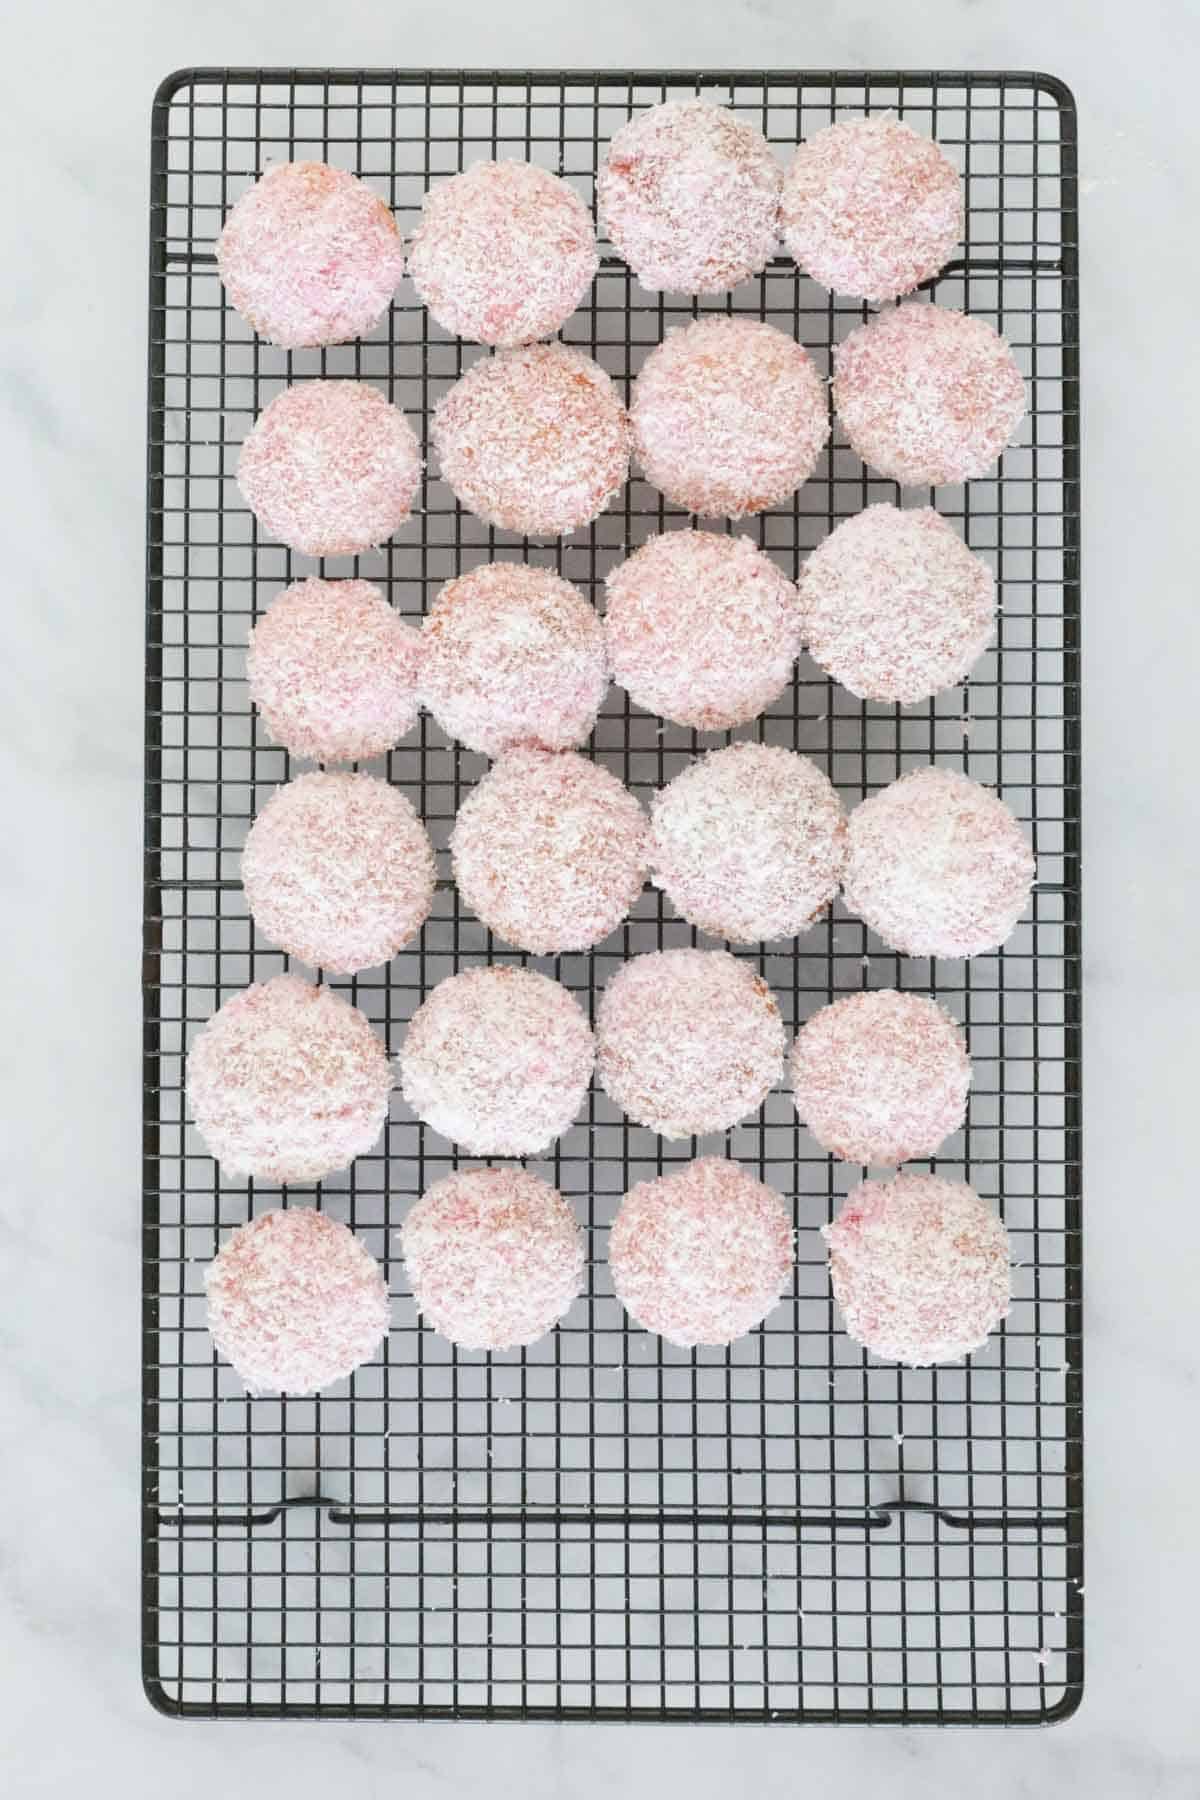 Unfilled jelly cakes on a wire rack.